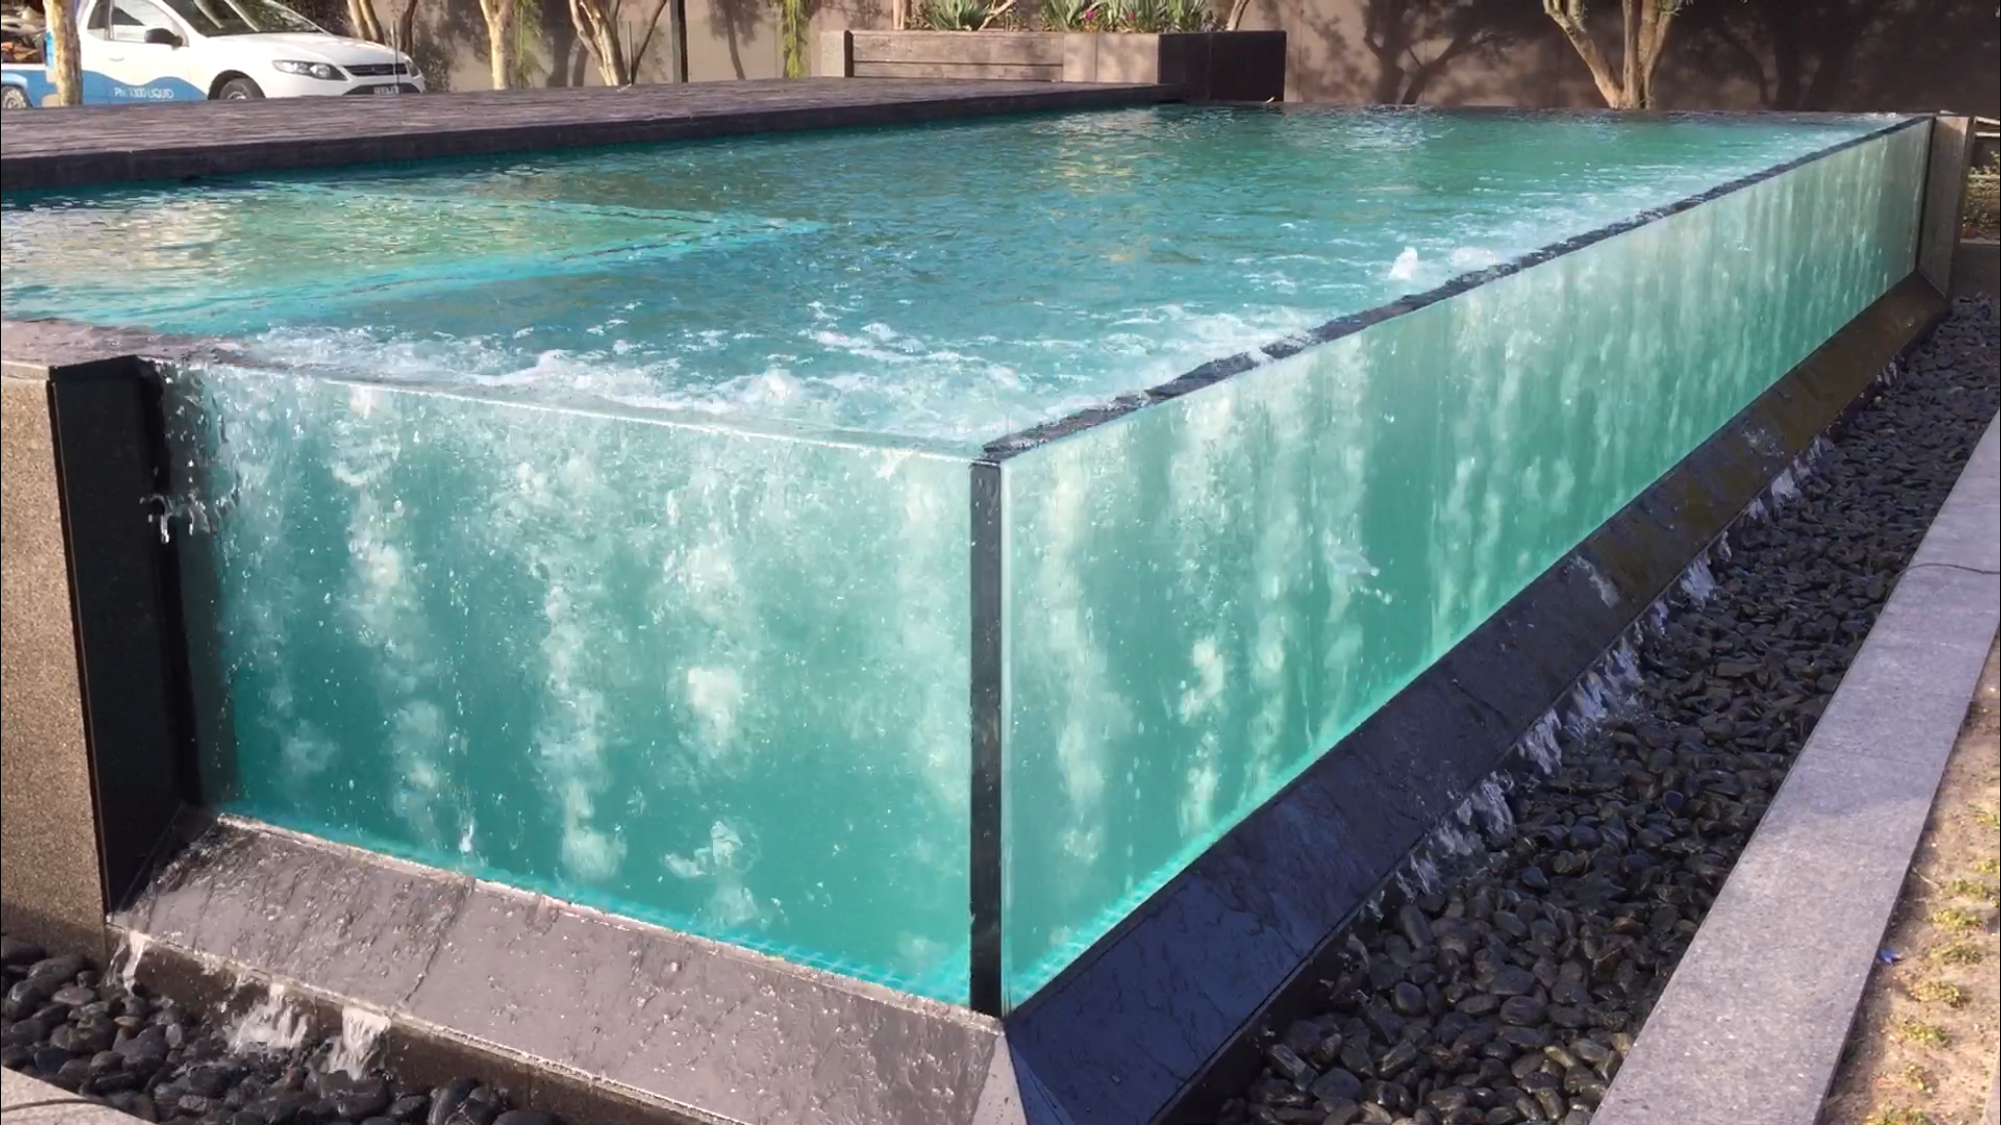 LEYU brings you a massive collection of trendy and luxurious acrylic aboveground swimming pools - Leyu